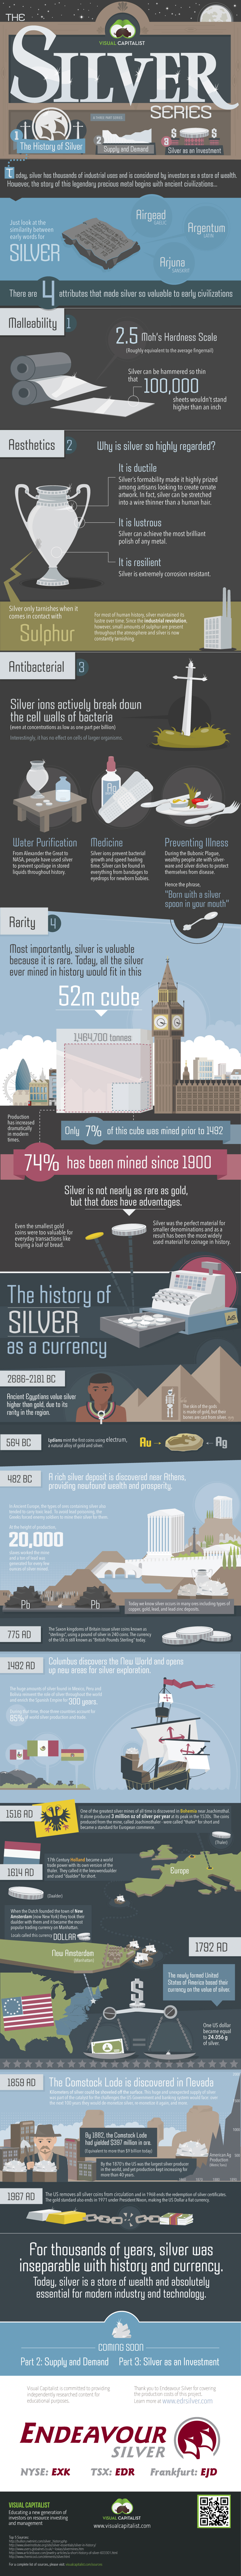 Silver infographic